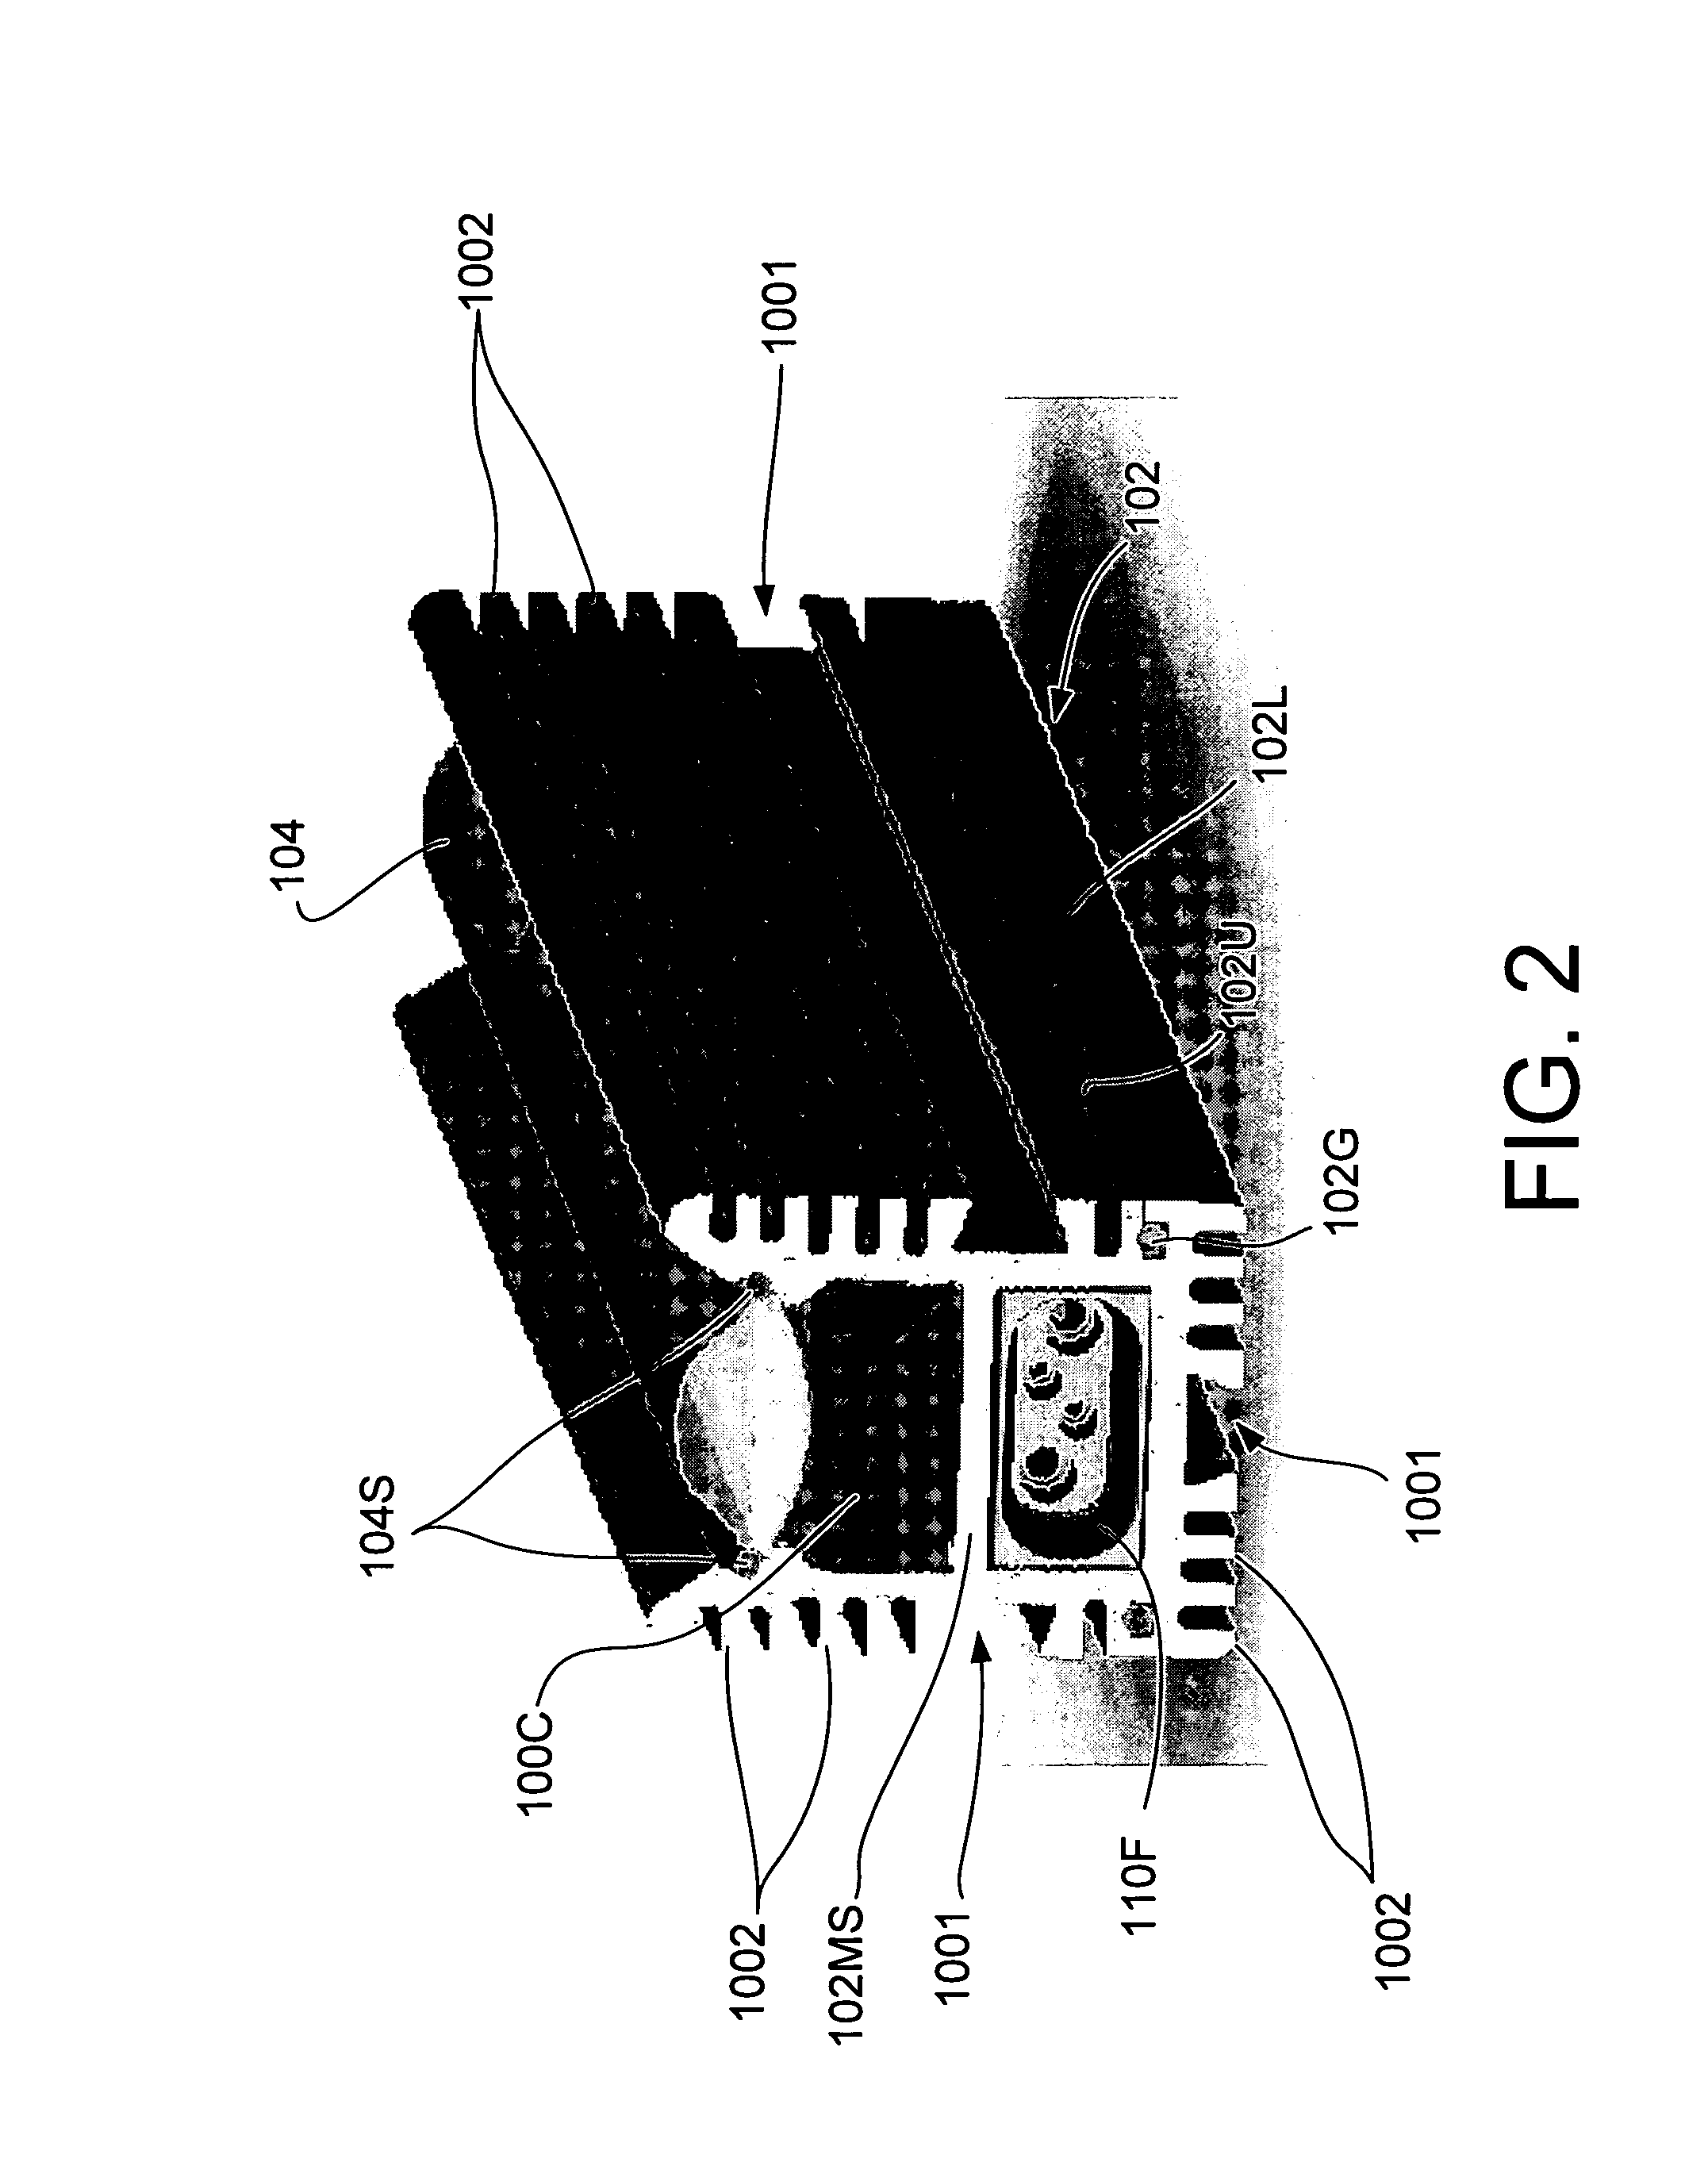 Interconnection arrangement having mortise and tenon connection features